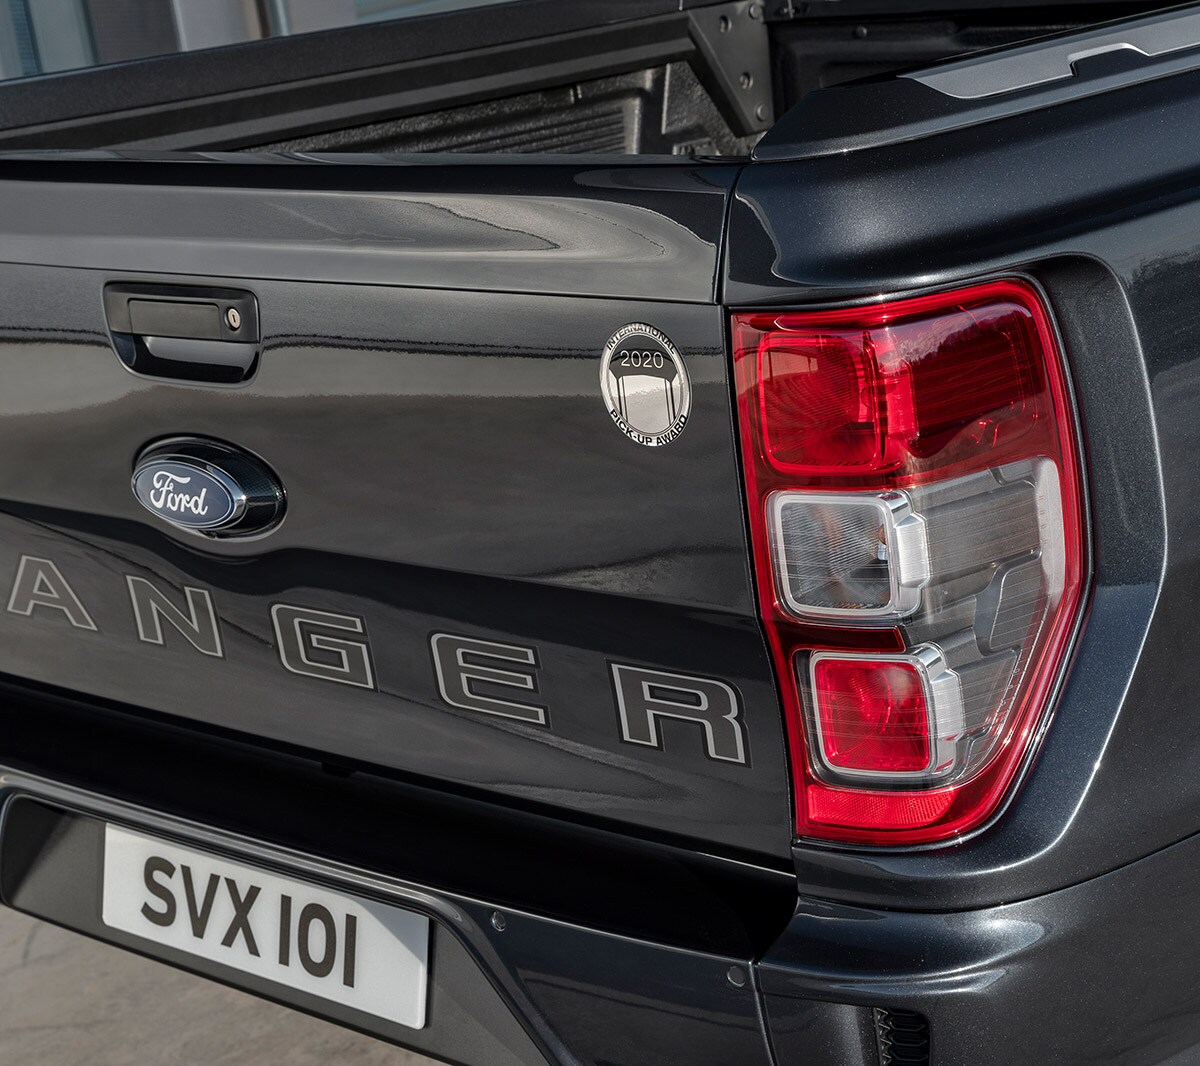 Ford Ranger MS-RT rear view